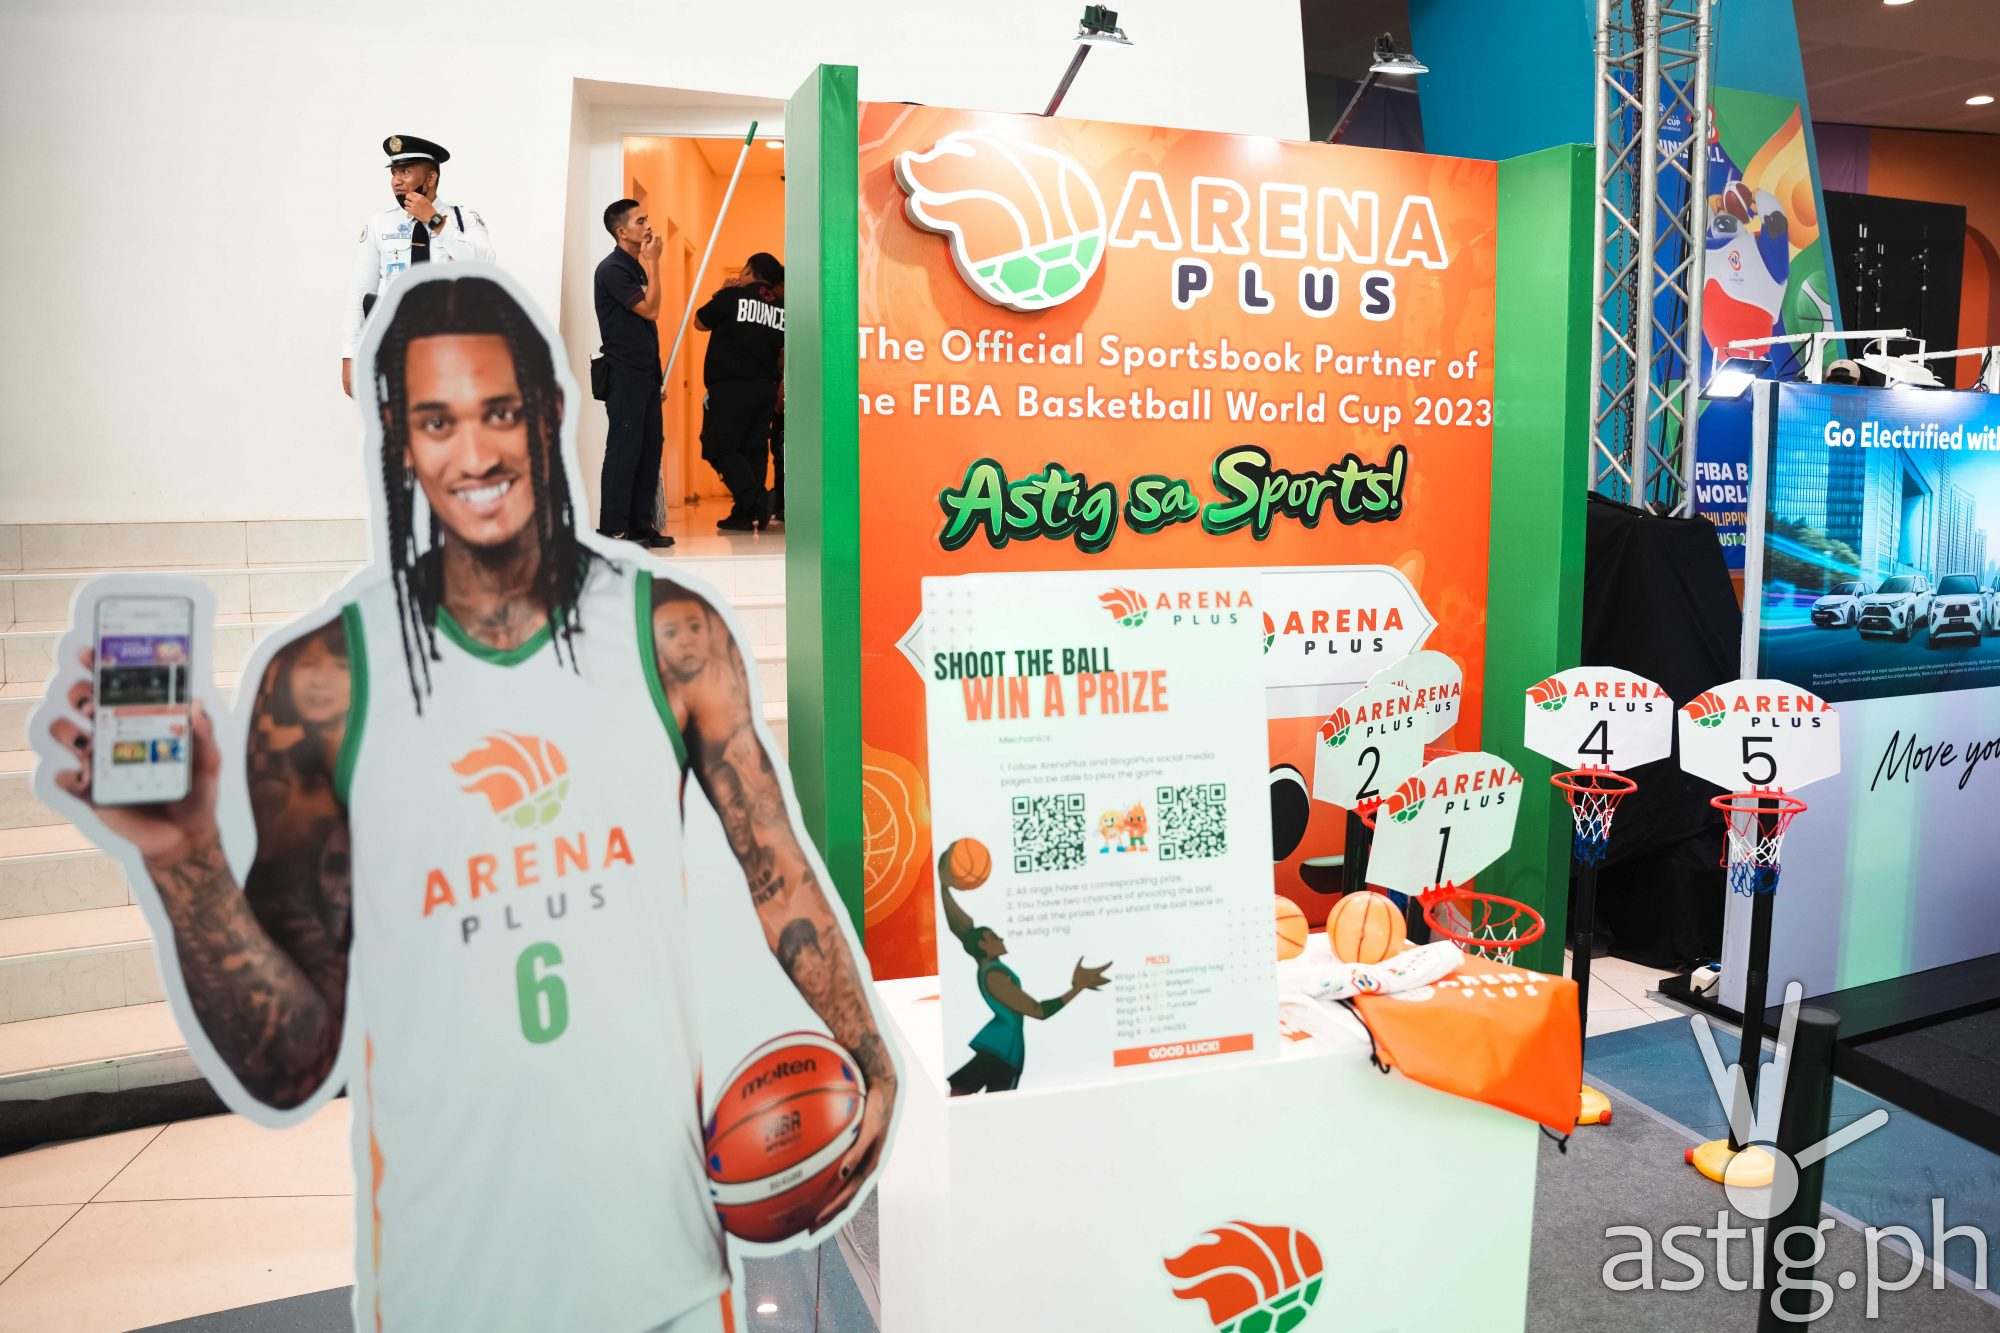 ArenaPlus ramped up fun and entertainment in the 2023 FIBA Basketball World Cup